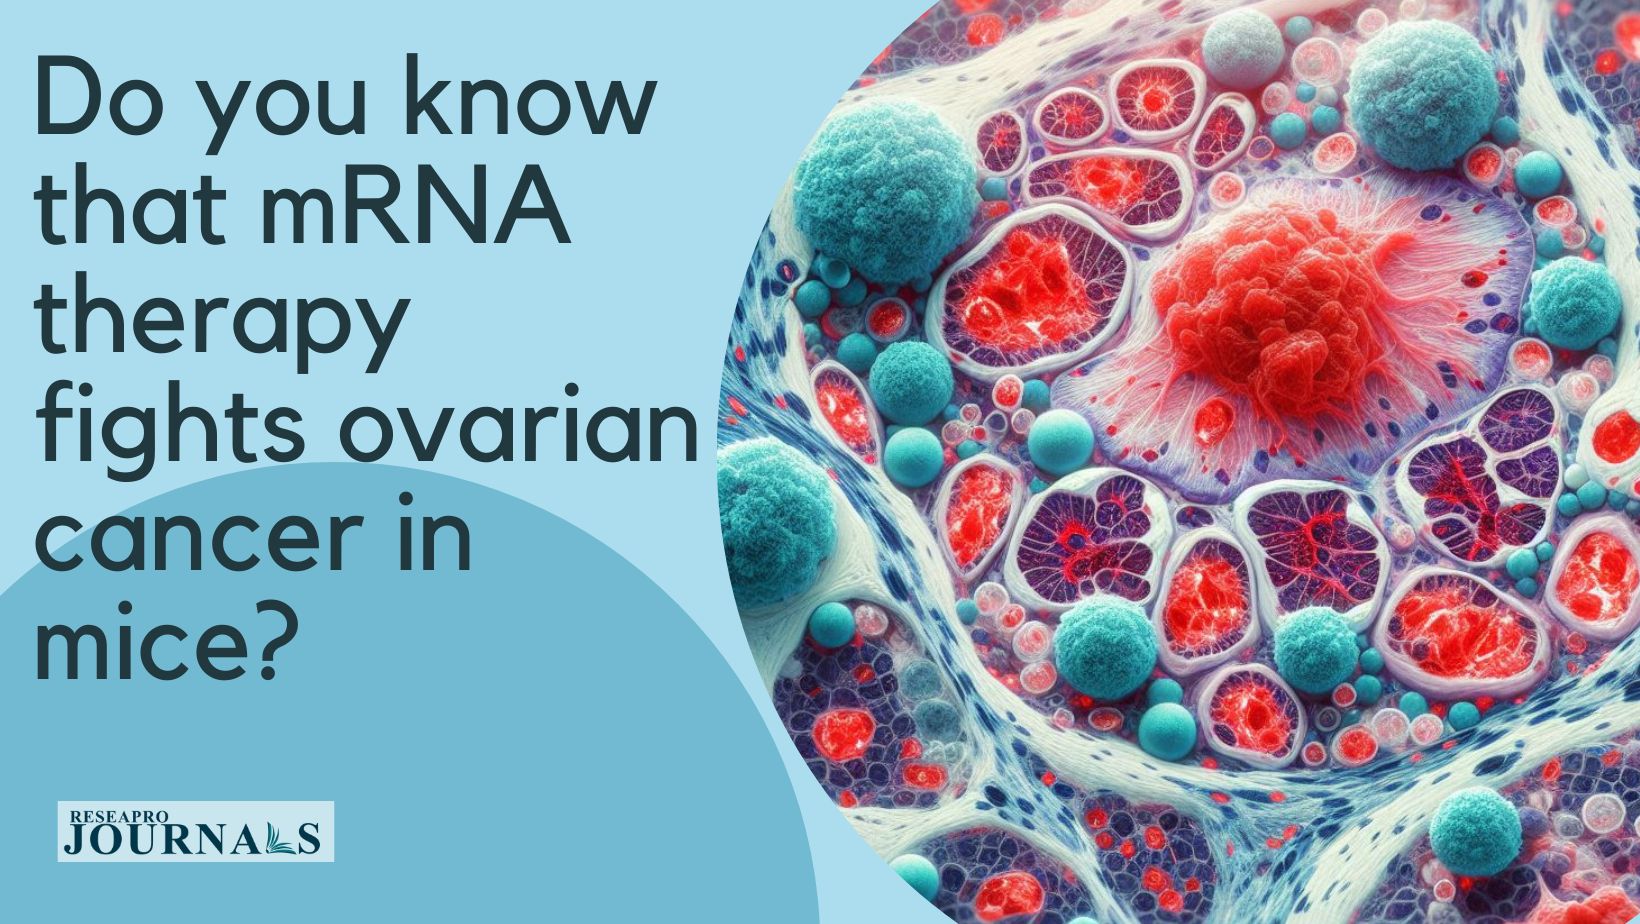 Revolutionary mRNA therapy offers hope in ovarian cancer treatment.